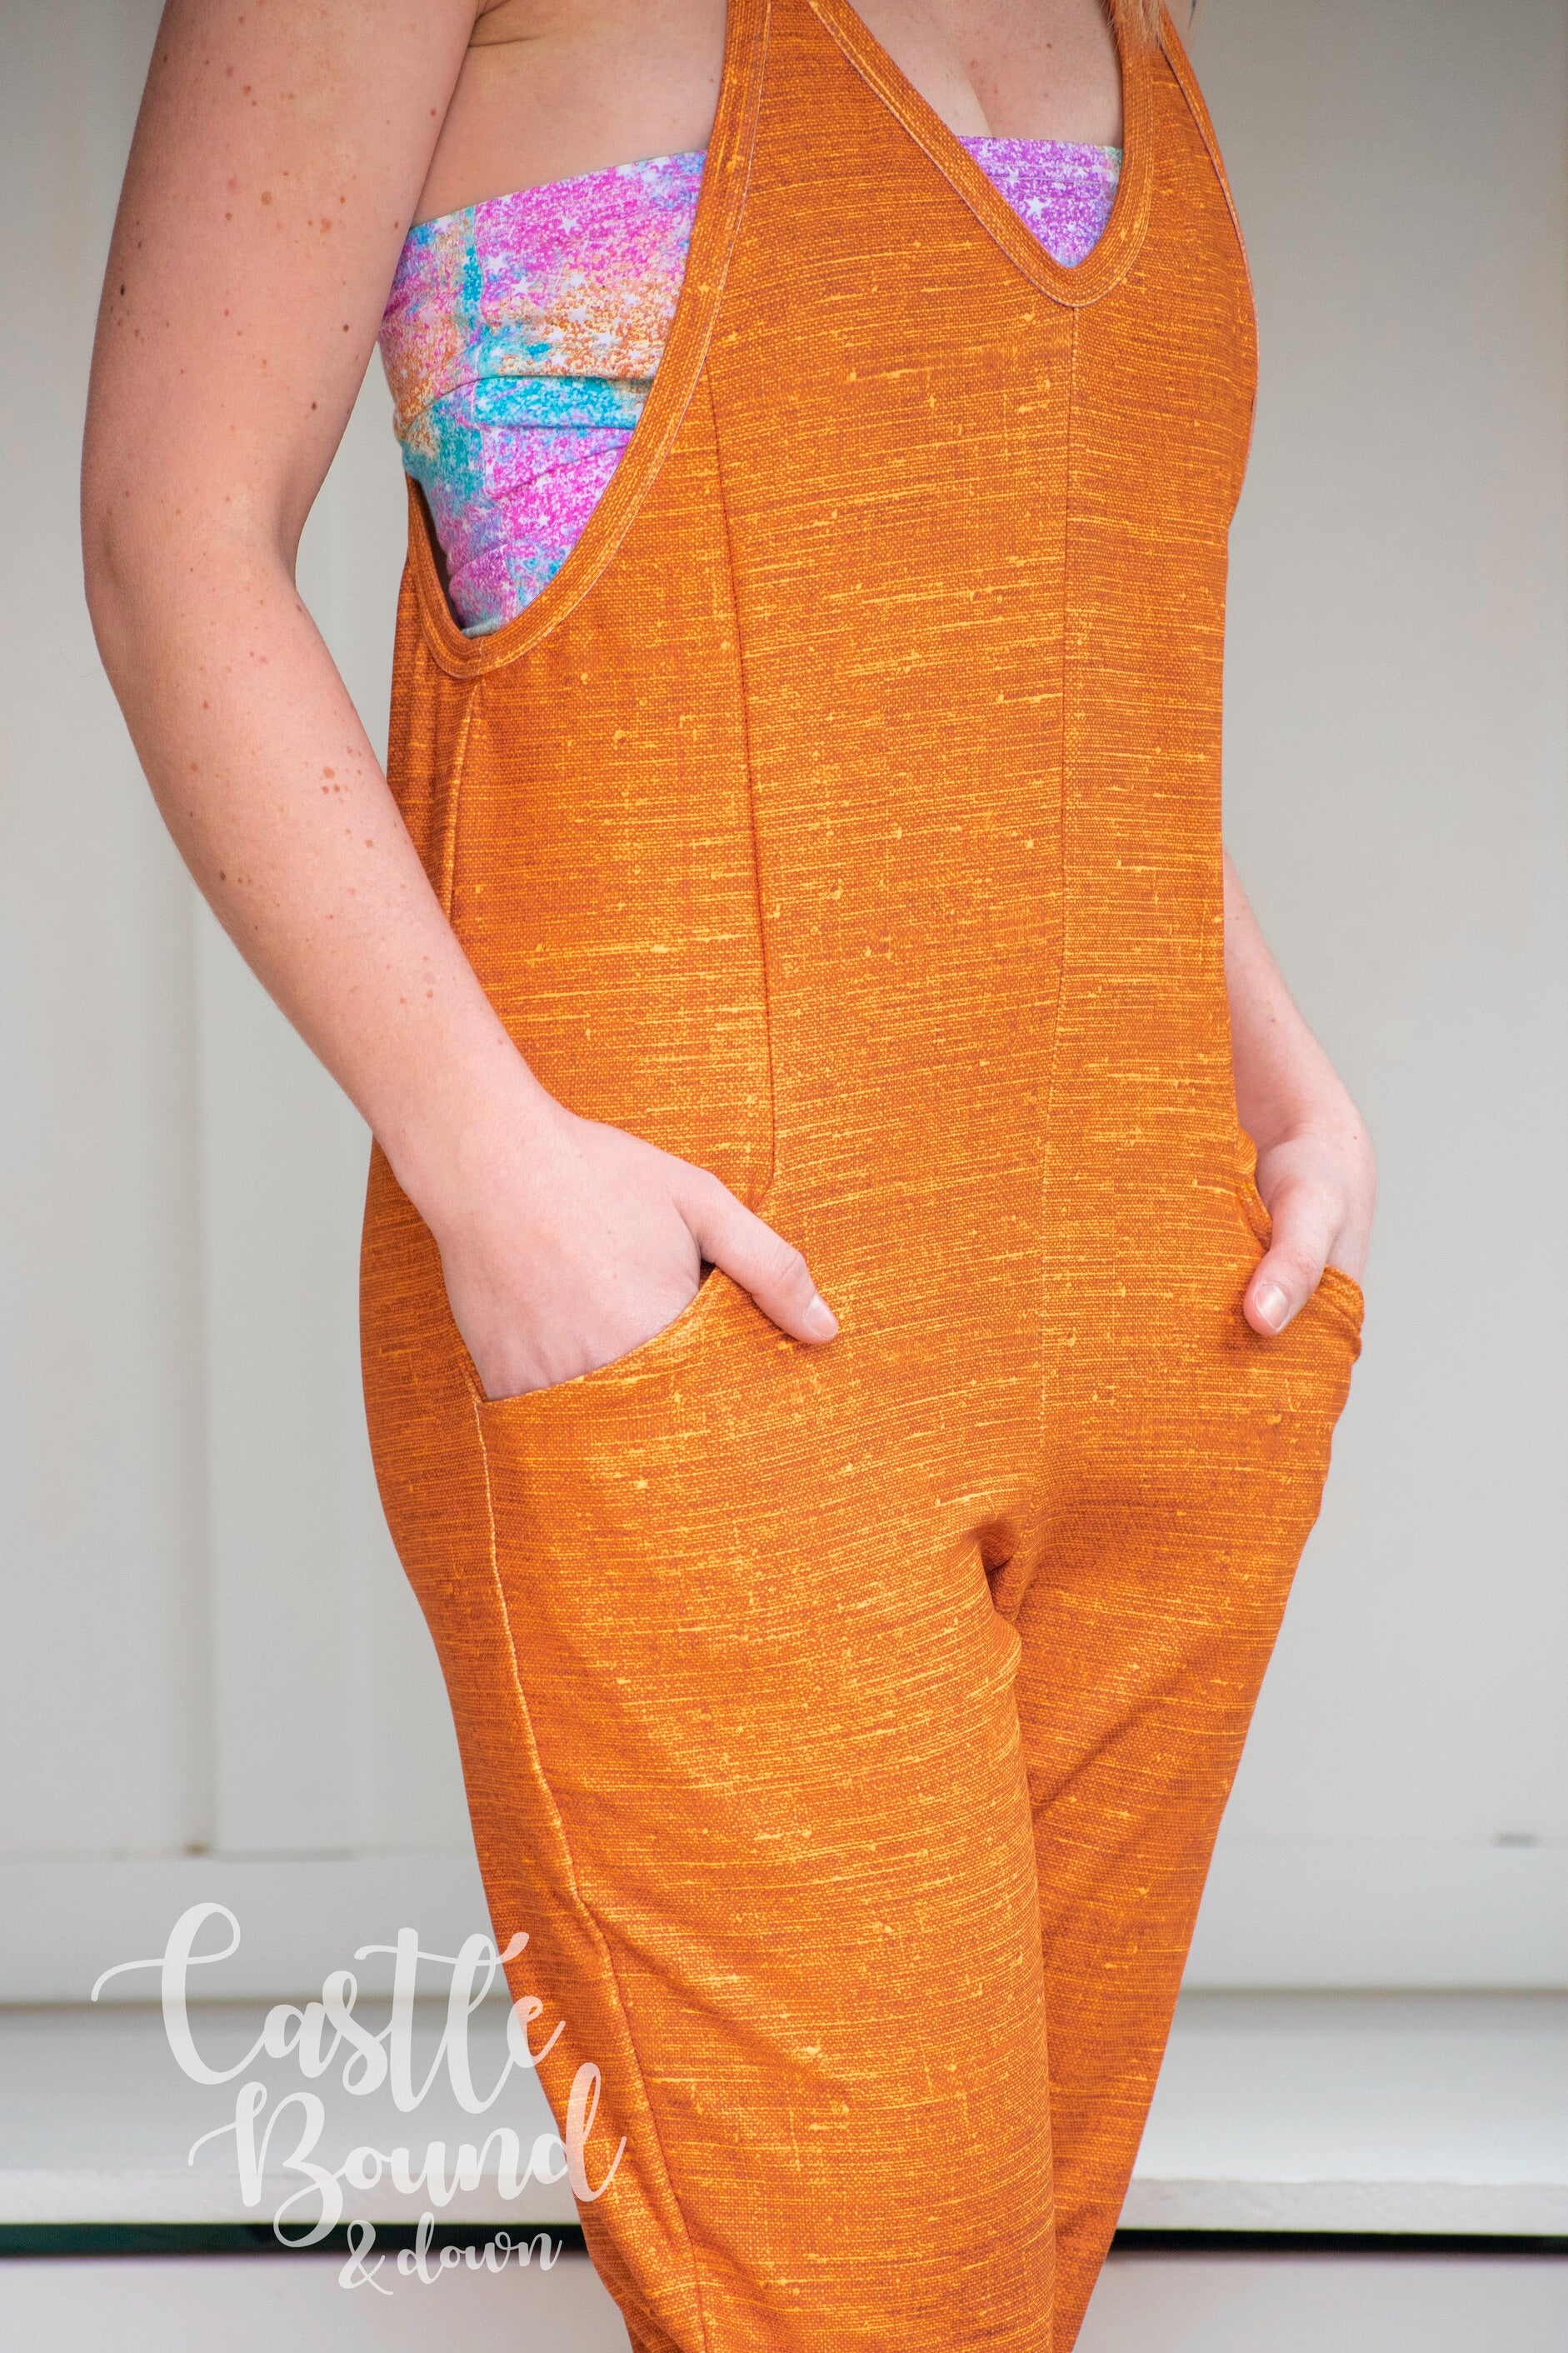 Adult Sewing Patterns